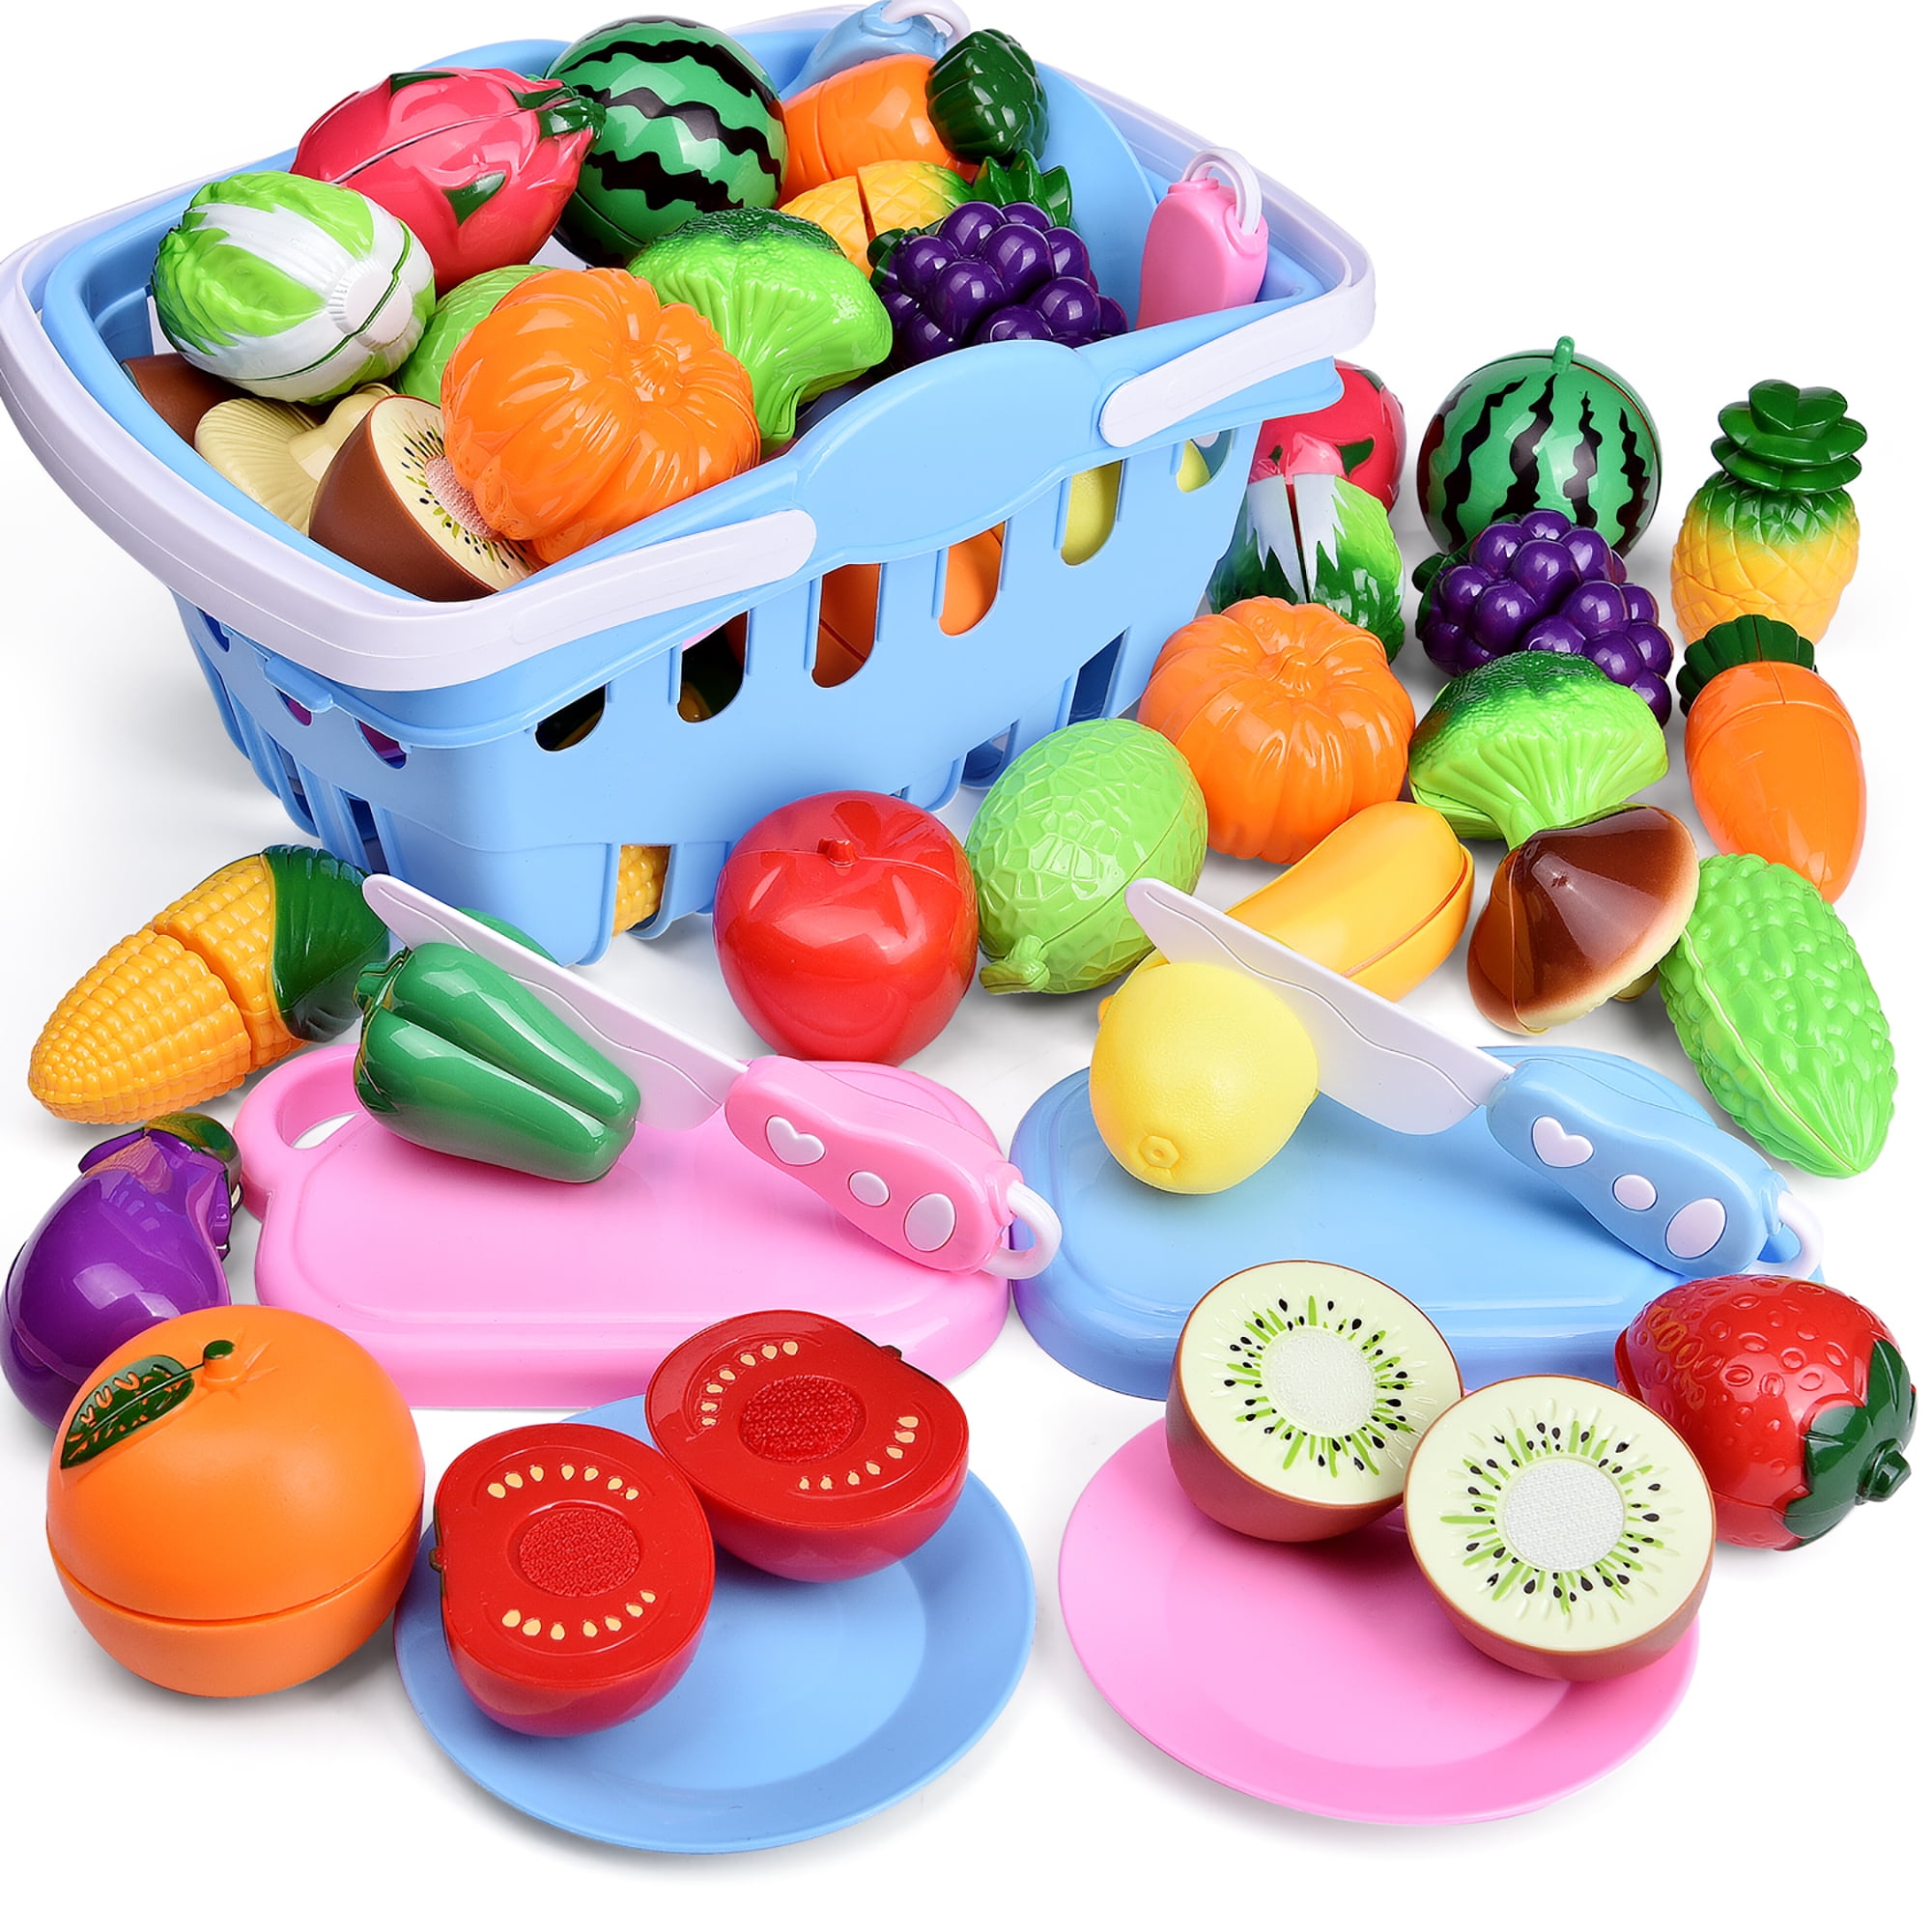 6PCS Kids Cutting Set Child Gift Role Play Kitchen Fruit Vegetable Food Toy 